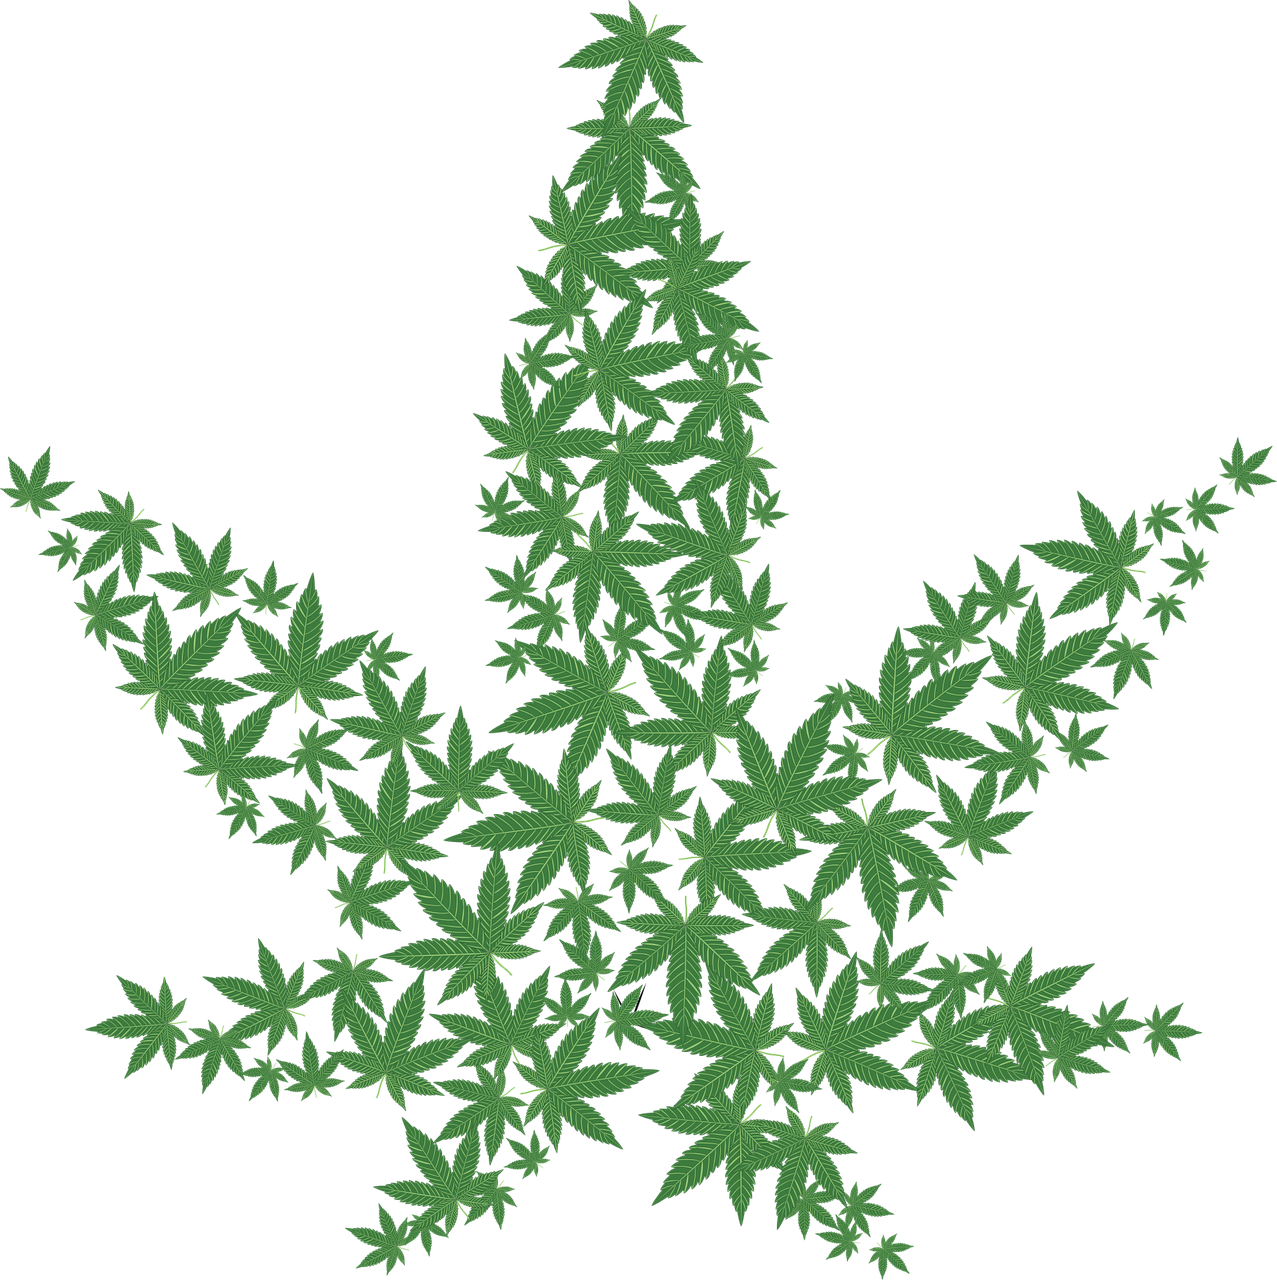 a green marijuana leaf on a black background, inspired by Mary Jane Begin, pixabay, digital art, made of flowers and leaves, 2 0 5 6 x 2 0 5 6, stylized silhouette, ivy vine leaf and flower top